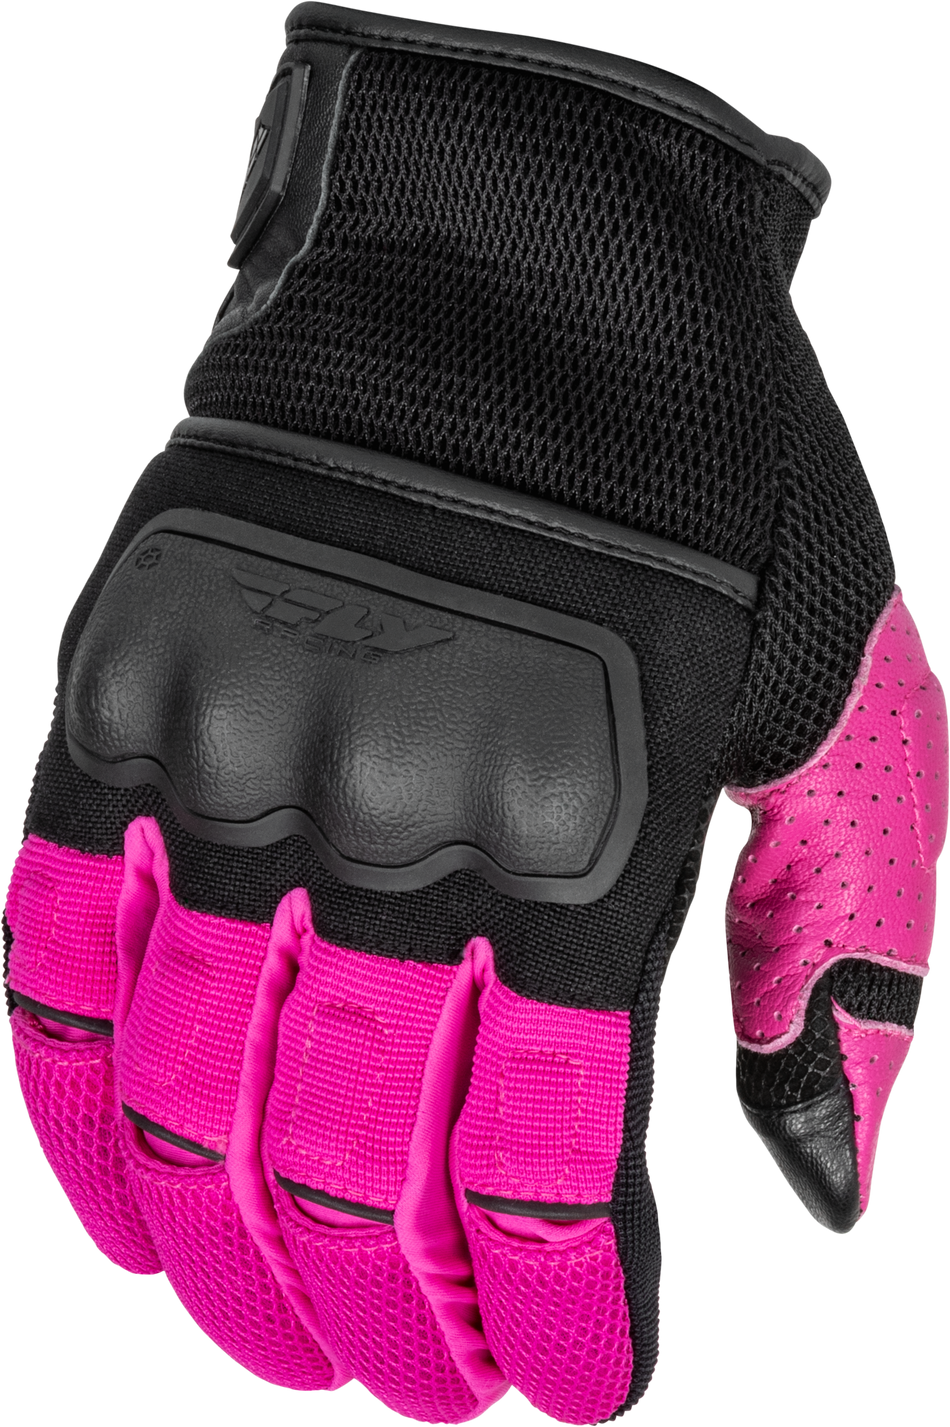 FLY RACING Women's Coolpro Force Gloves Black/Pink Xl 476-6302X